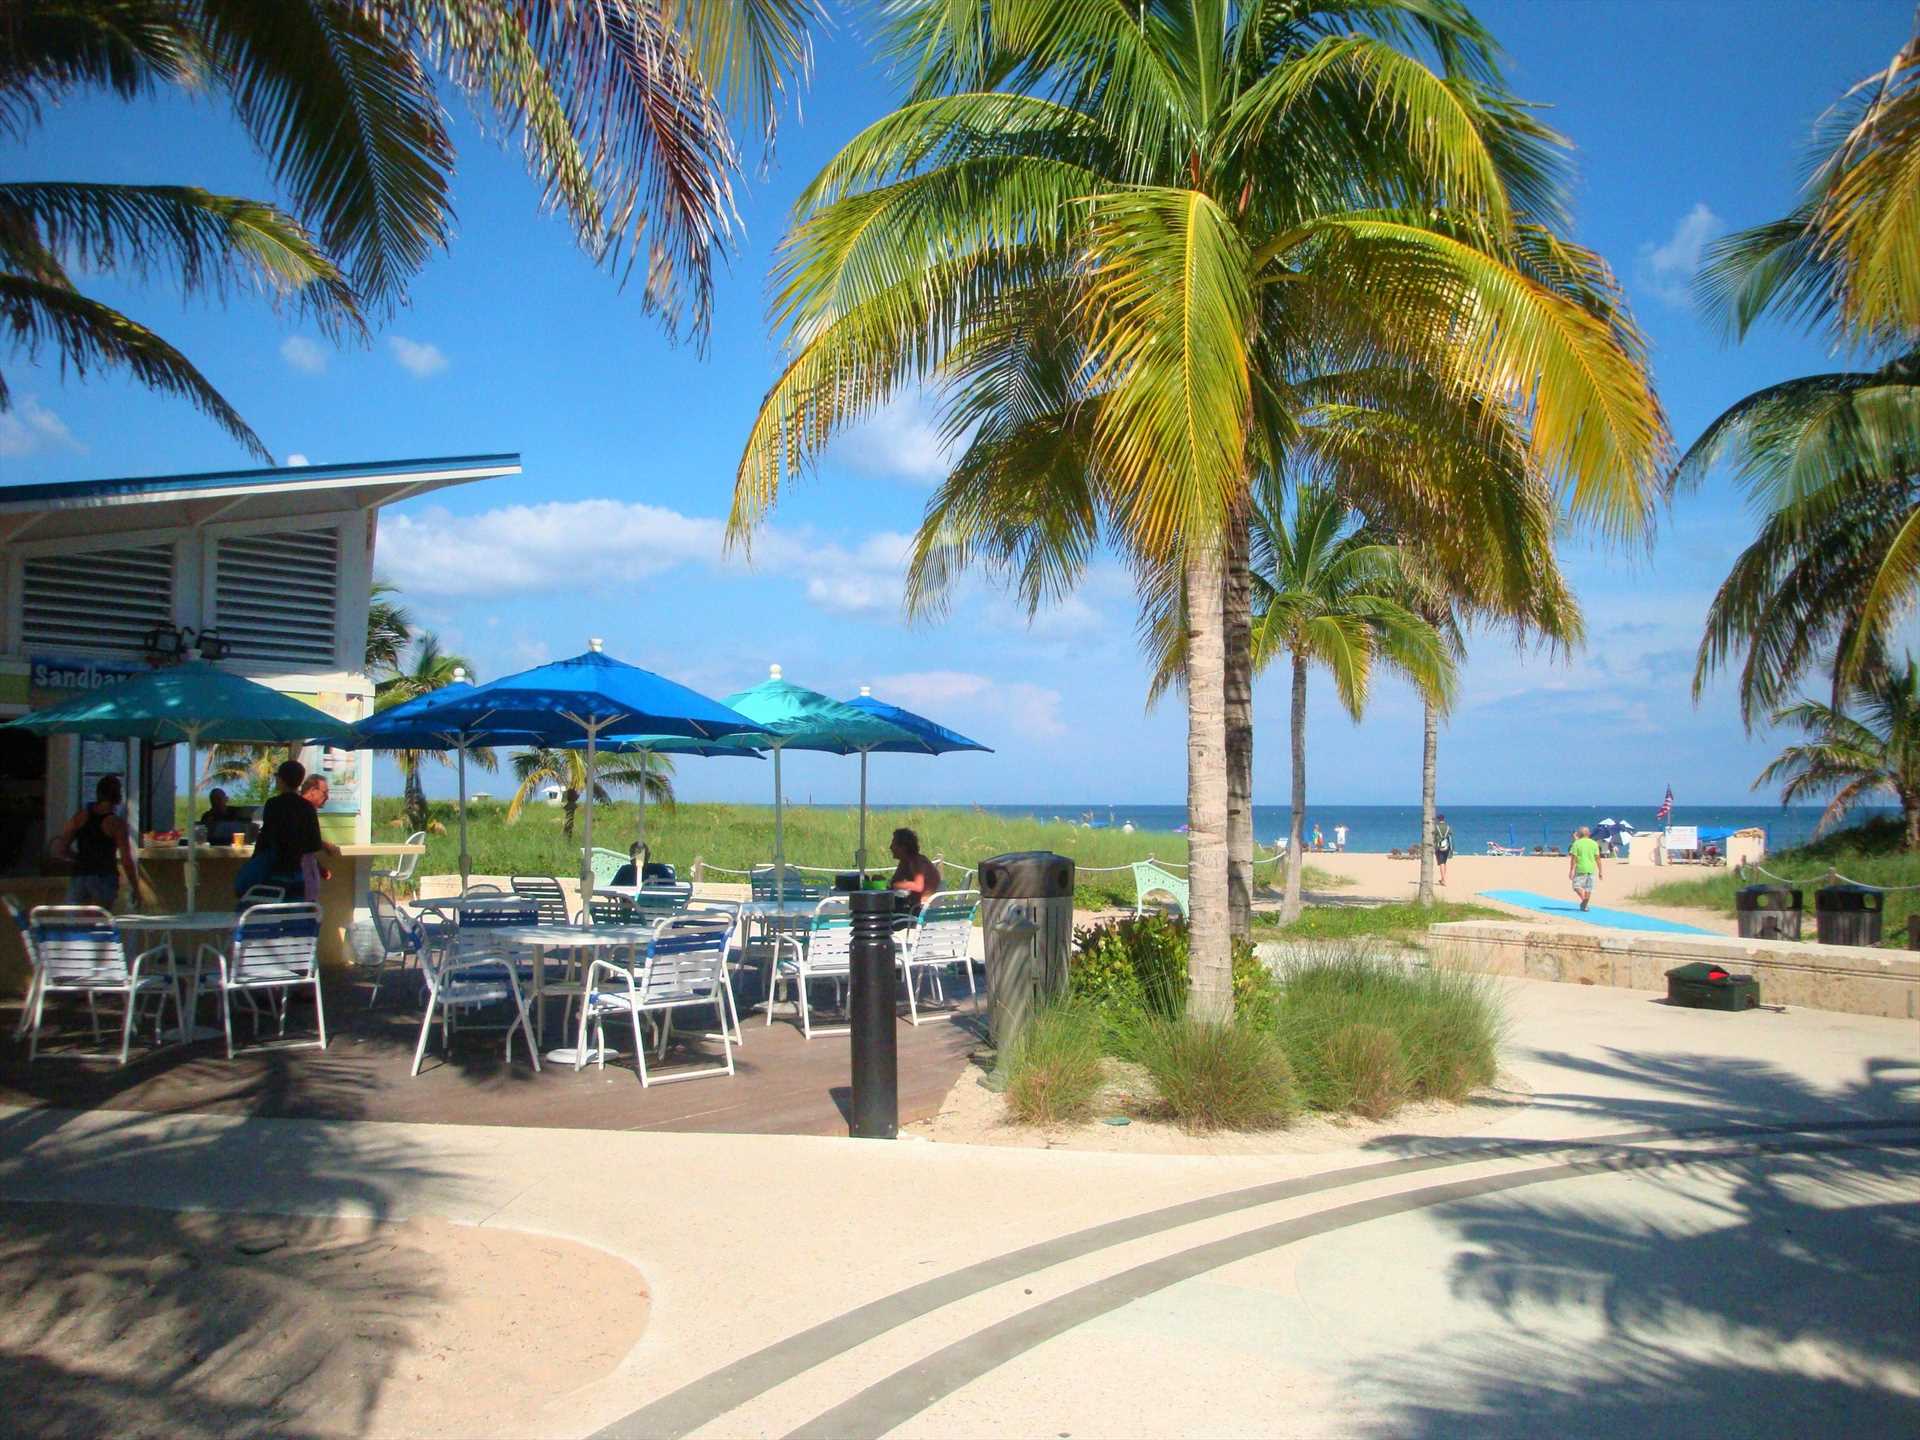 Family friendly Pompano Beach is just a 20 minute drive with